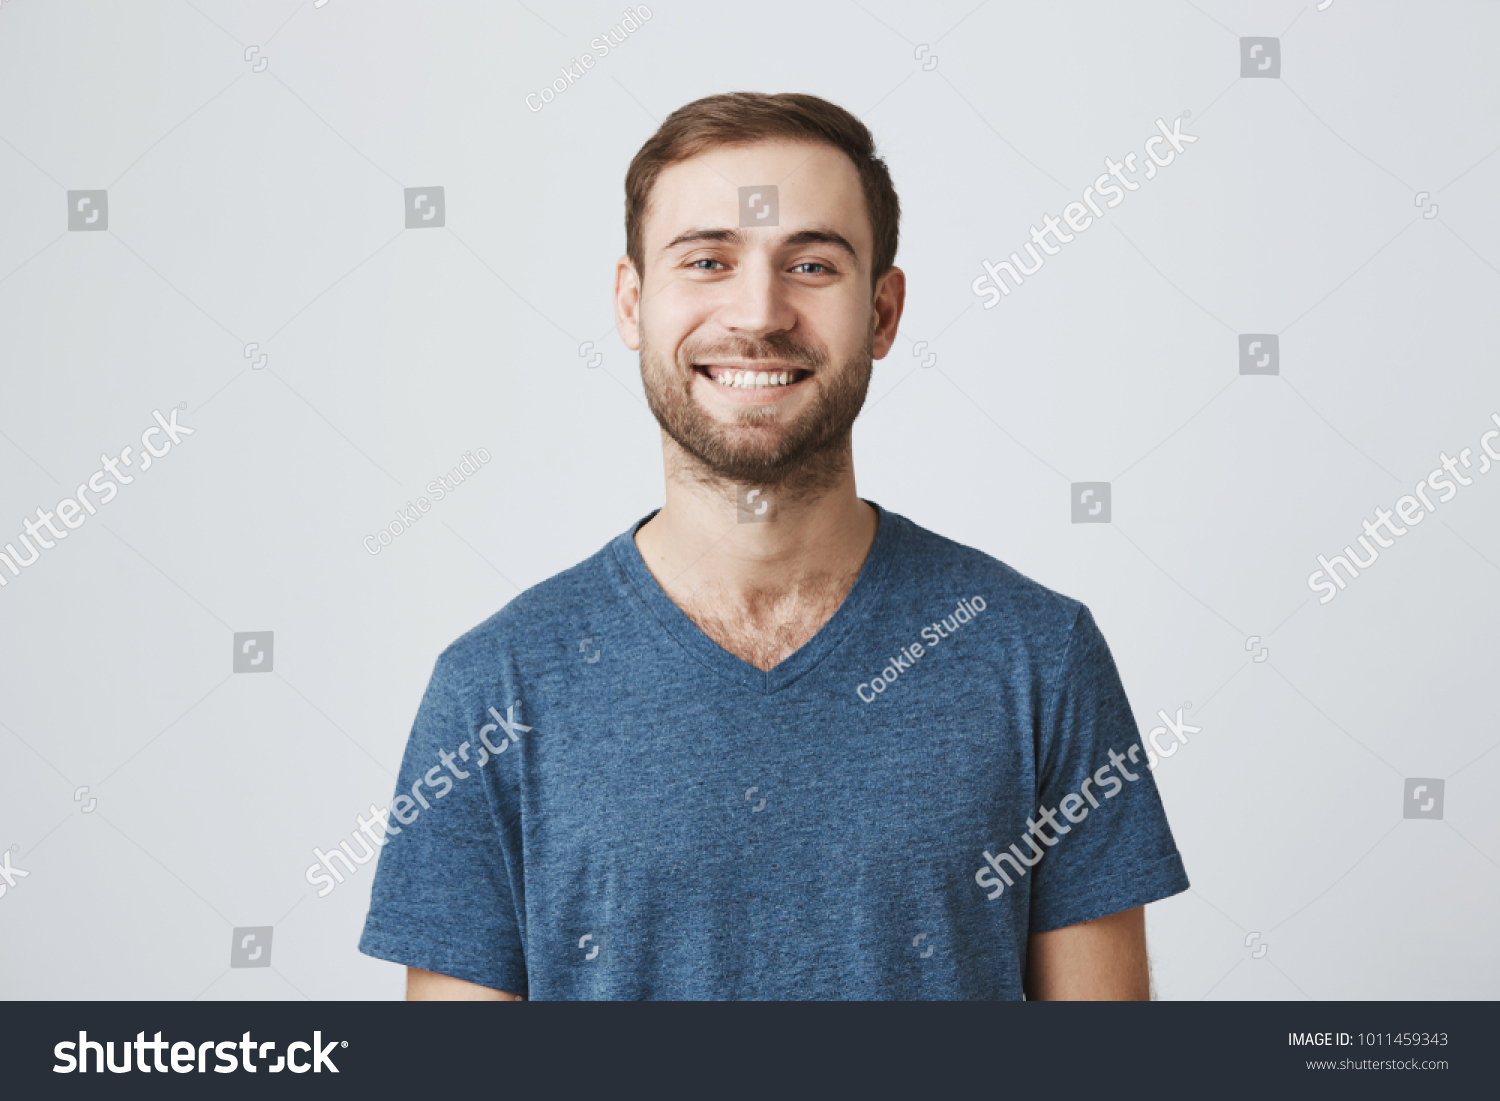 Studio shot of joyfully smiling bearded european male model in blue t-shirt, looking at camera with broad smile. Positive emotions, feelings and reaction #1011459343